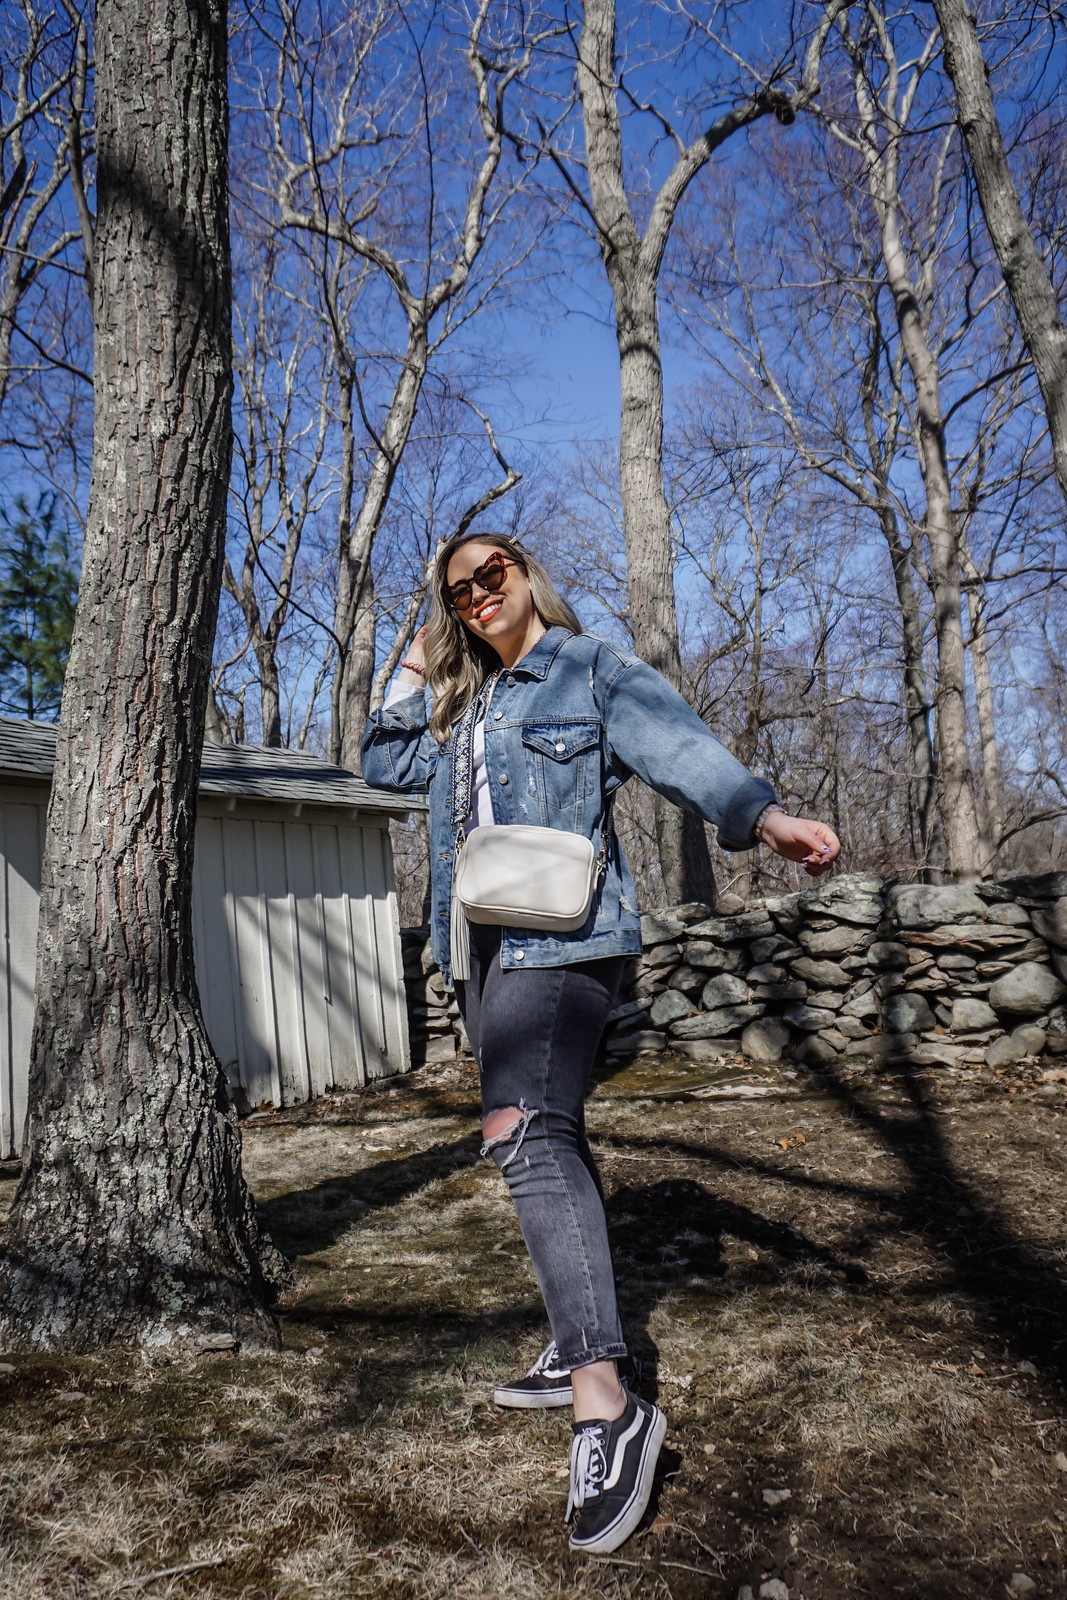 Ahdorned Bags | Spring Outfits Casual | Aesthetic Outfits | Mom Jeans | Vans Sneakers | Denim Jacket | Ahdorned: The Handbag Company You Need to Know About